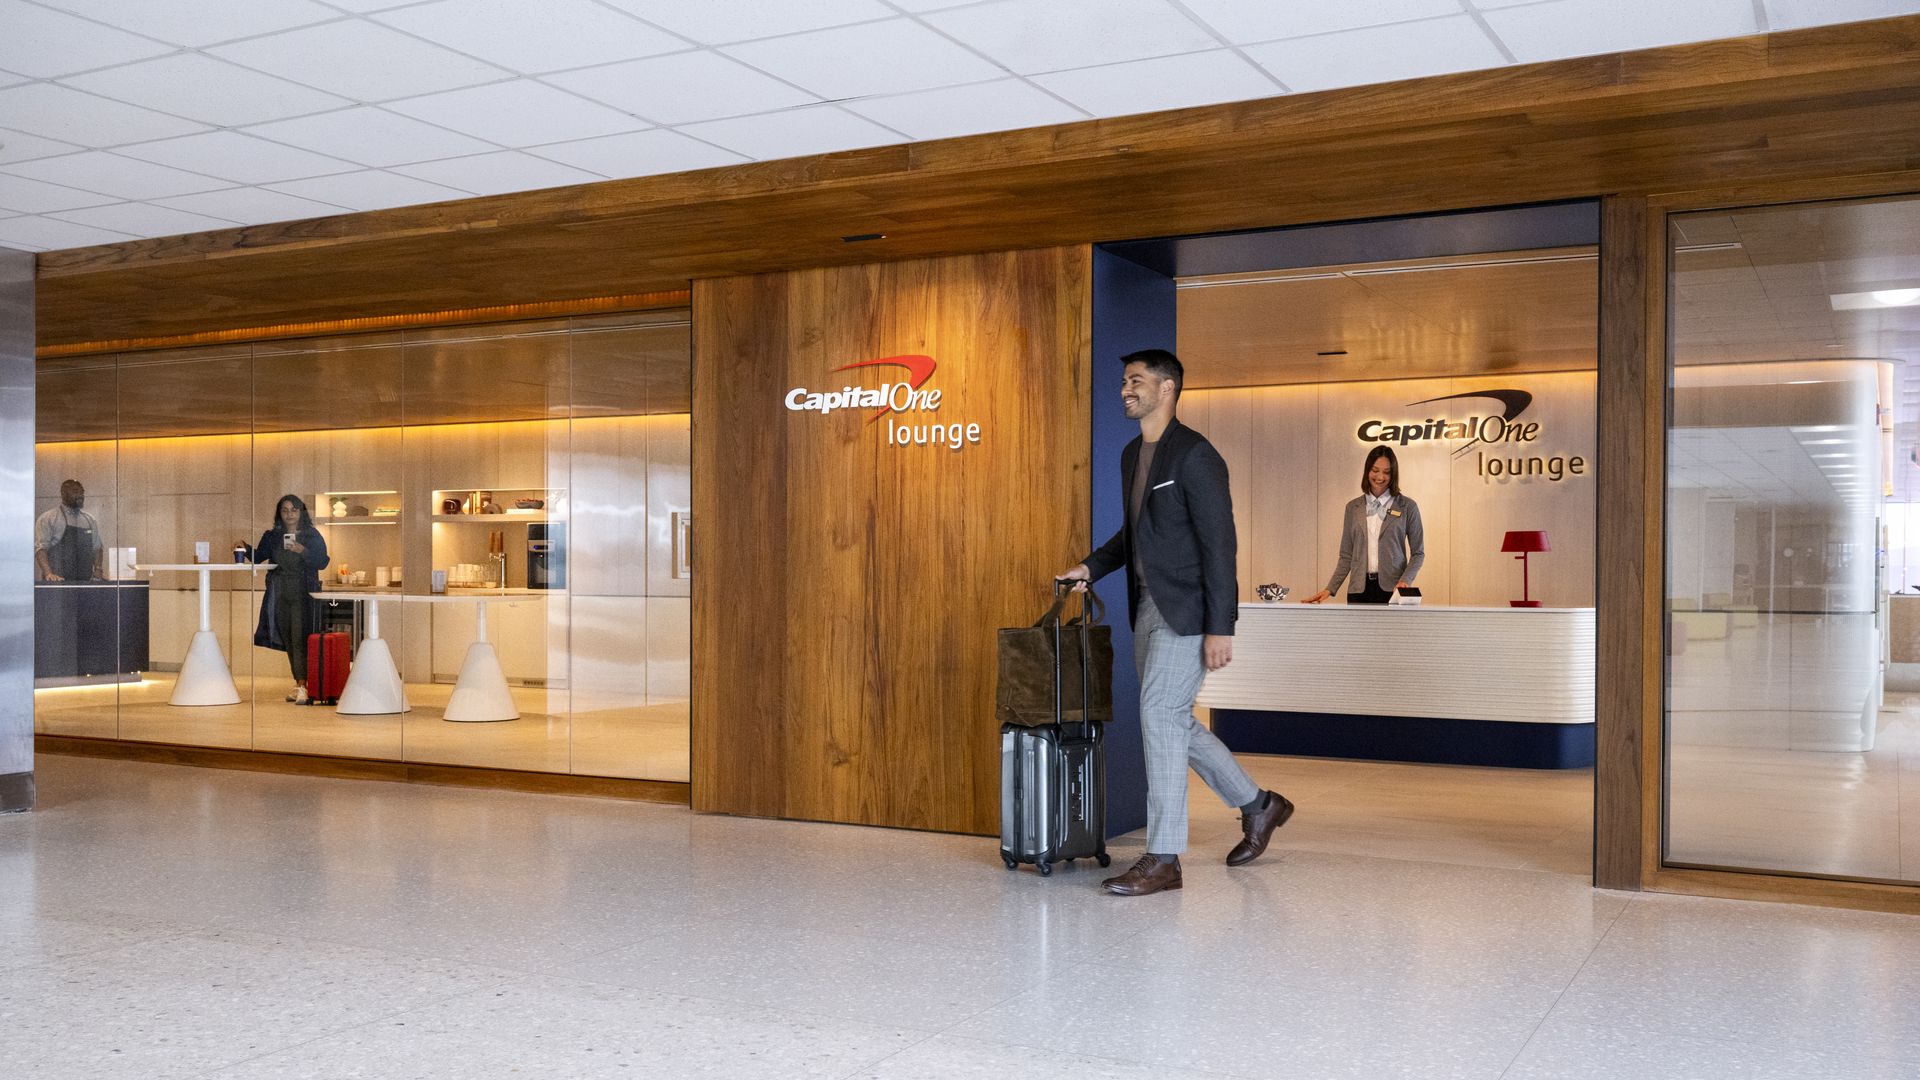 An airline traveler exits the Capital One lounge